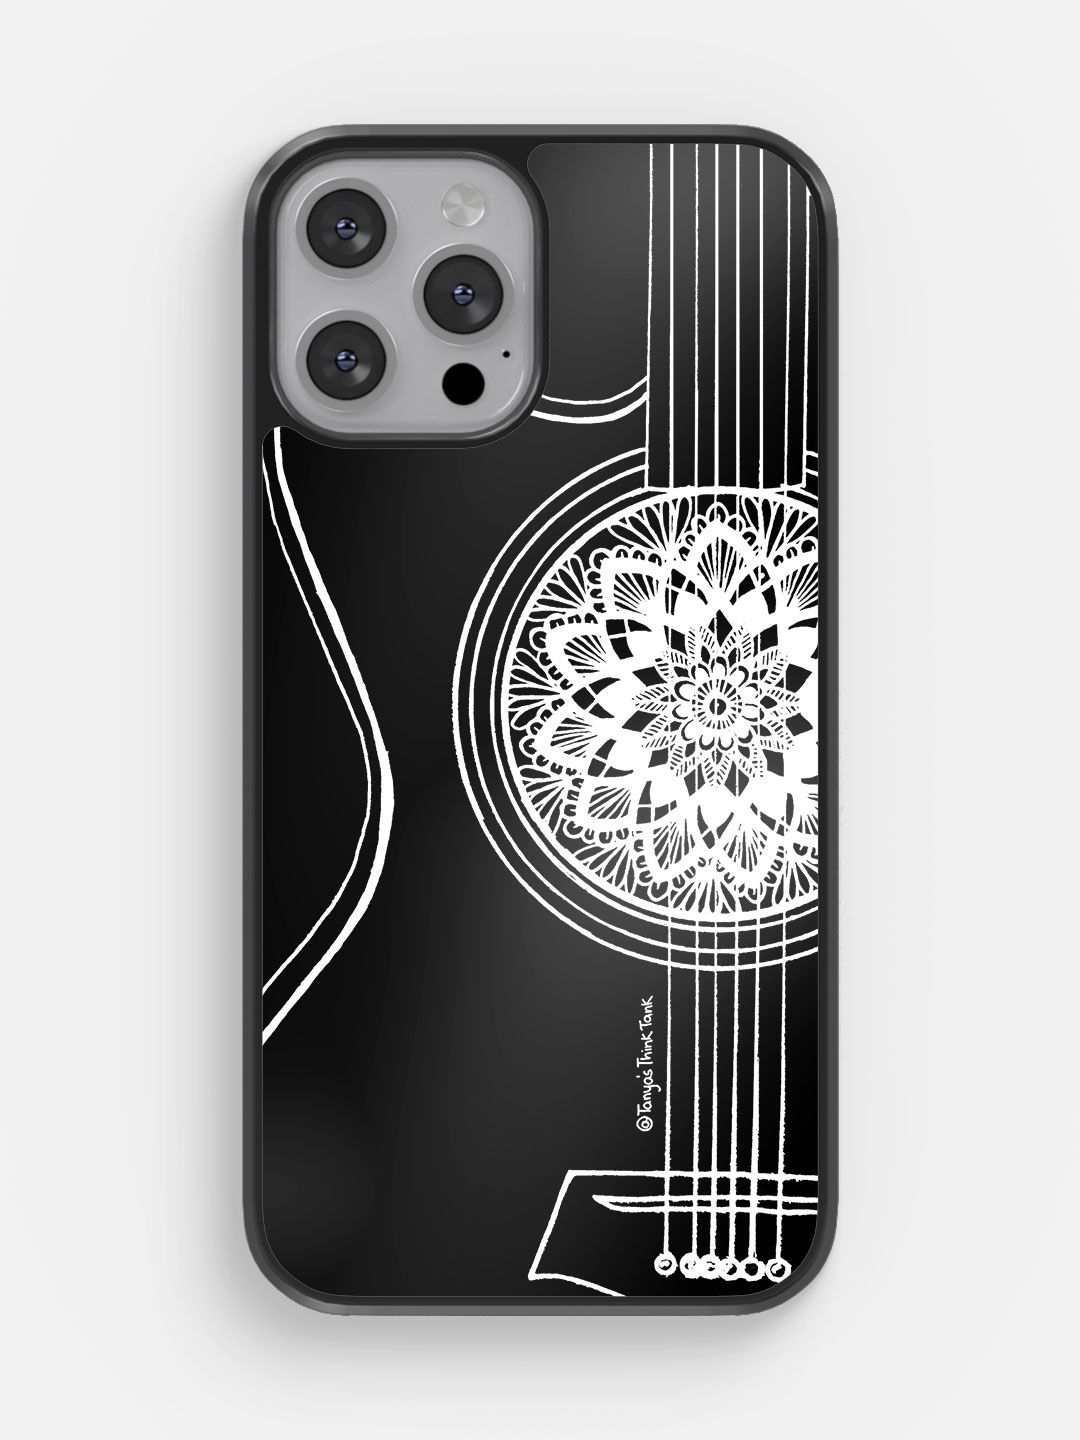 Buy Guitar White - Bumper Phone Case for iPhone 12 Pro Max Phone Cases & Covers Online